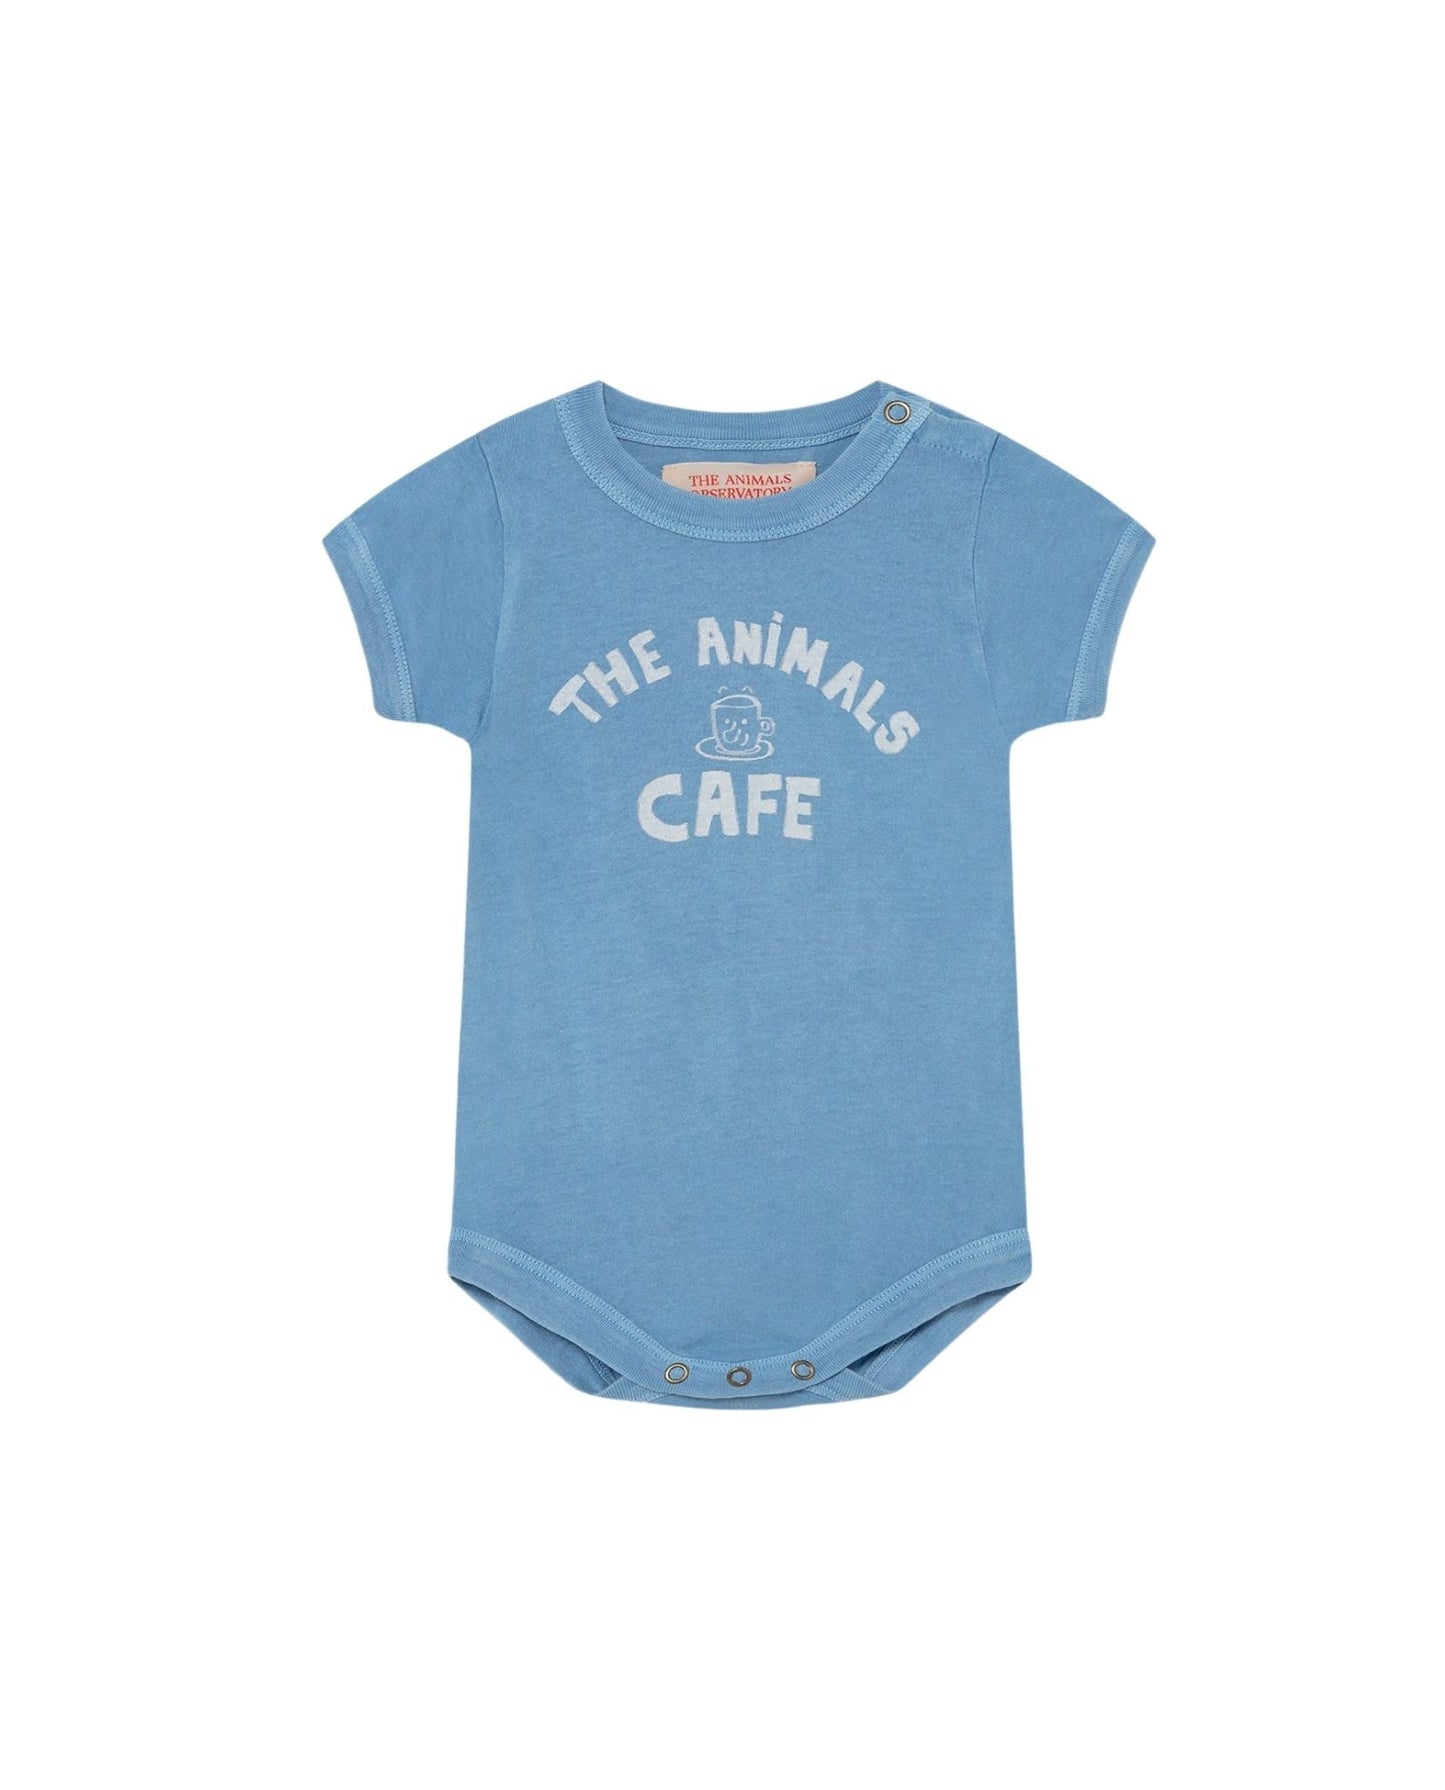 Chimpanzee baby body Blue Baby Grows The Animals Observatory 